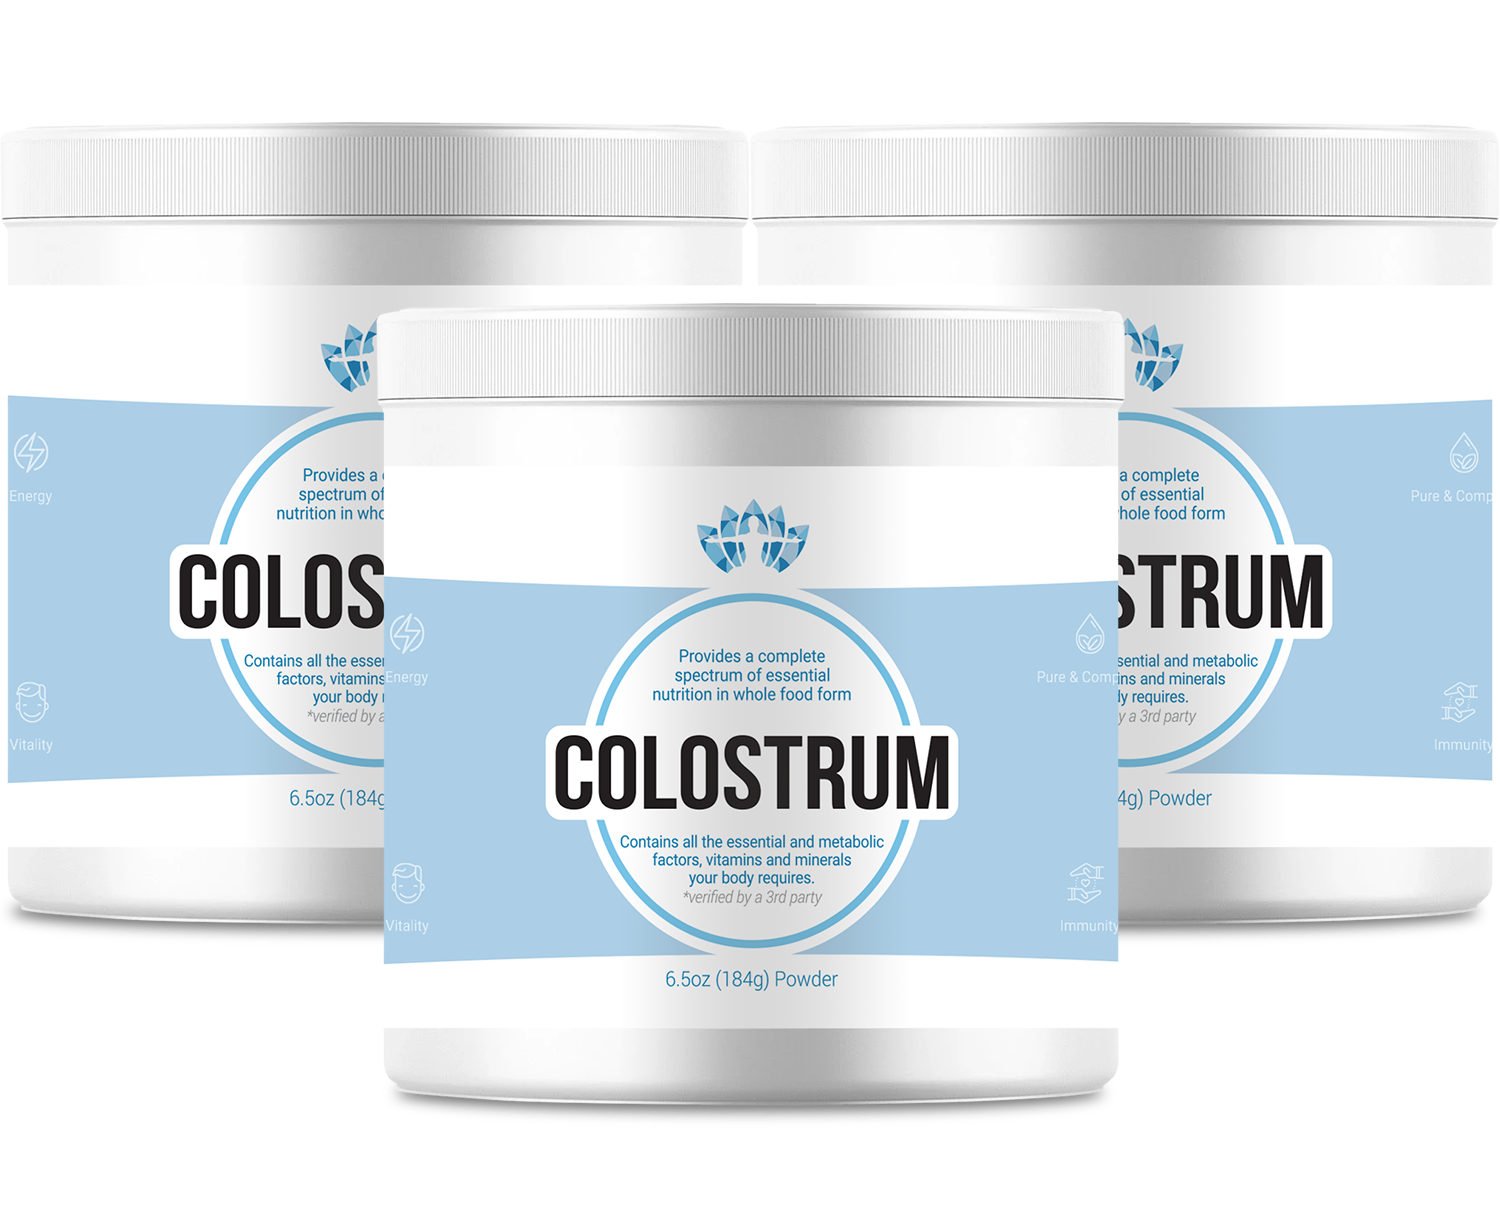 3 bottles of colostrum. Colostrum benefits have been proven to boost your immunity and provide optimum health. Colostrum is delicious and can be used in your favourite smoothie recipe.